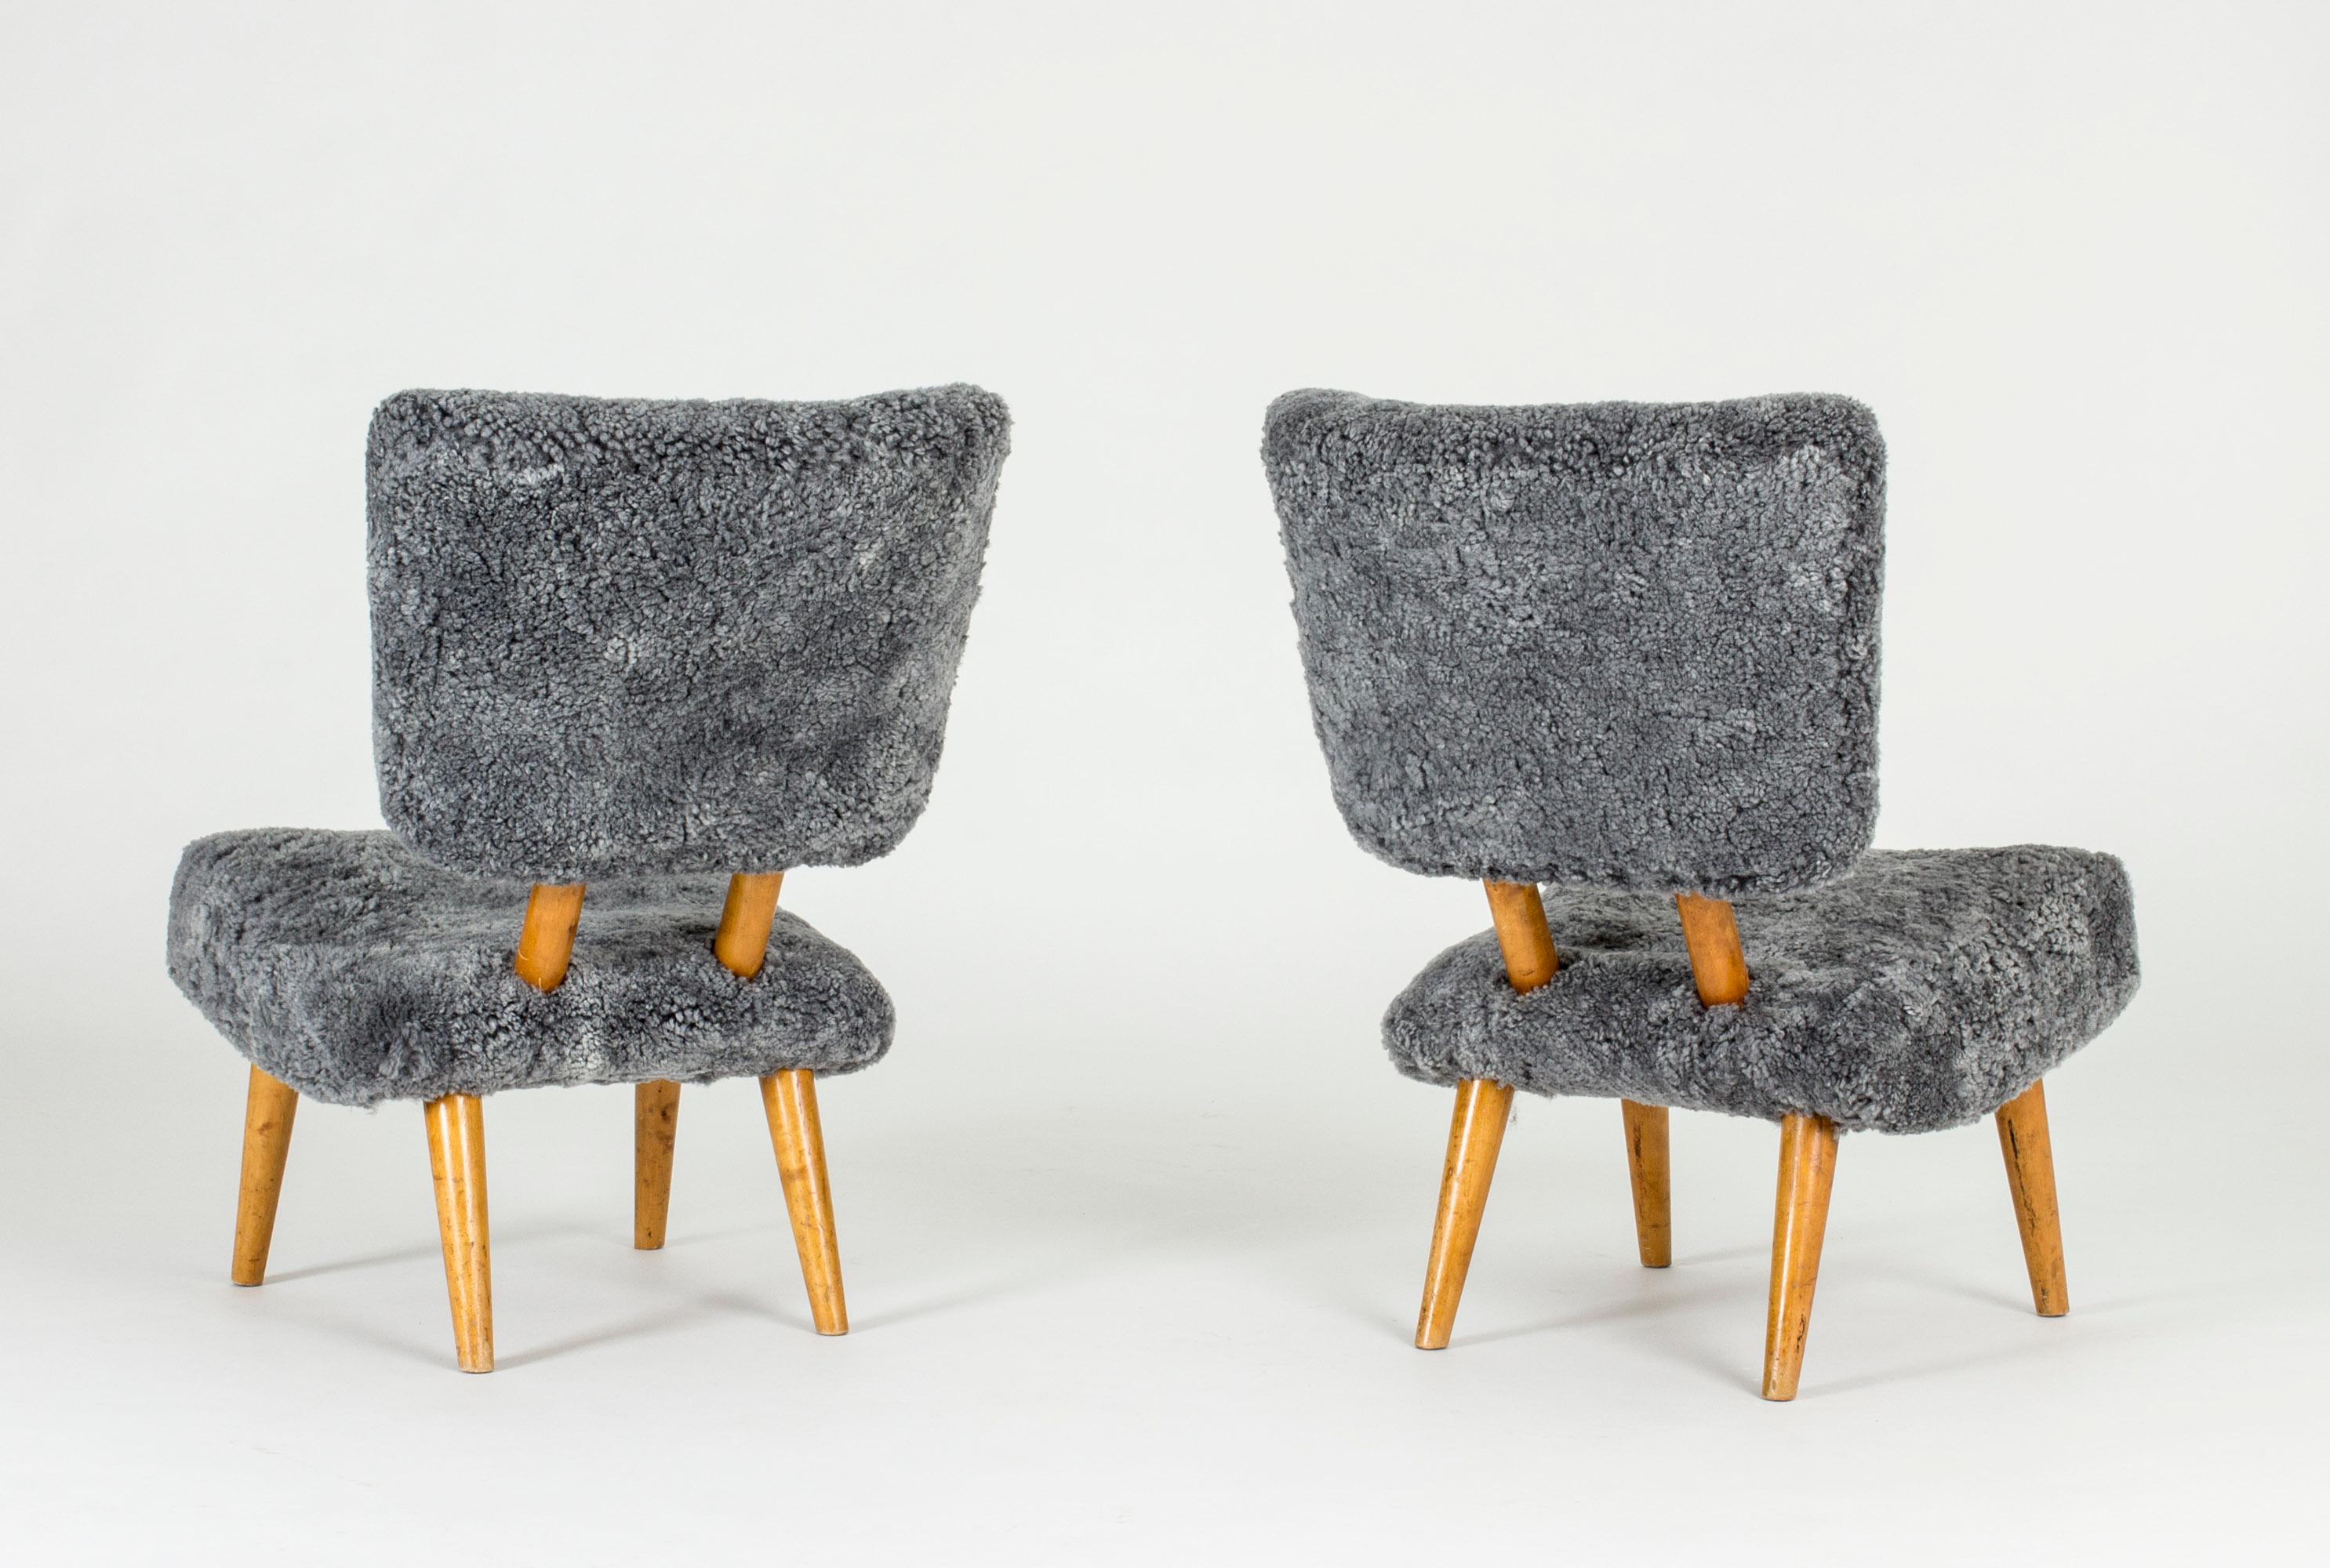 Pair of Norwegian 1940s Sheepskin Chairs In Good Condition For Sale In Stockholm, SE